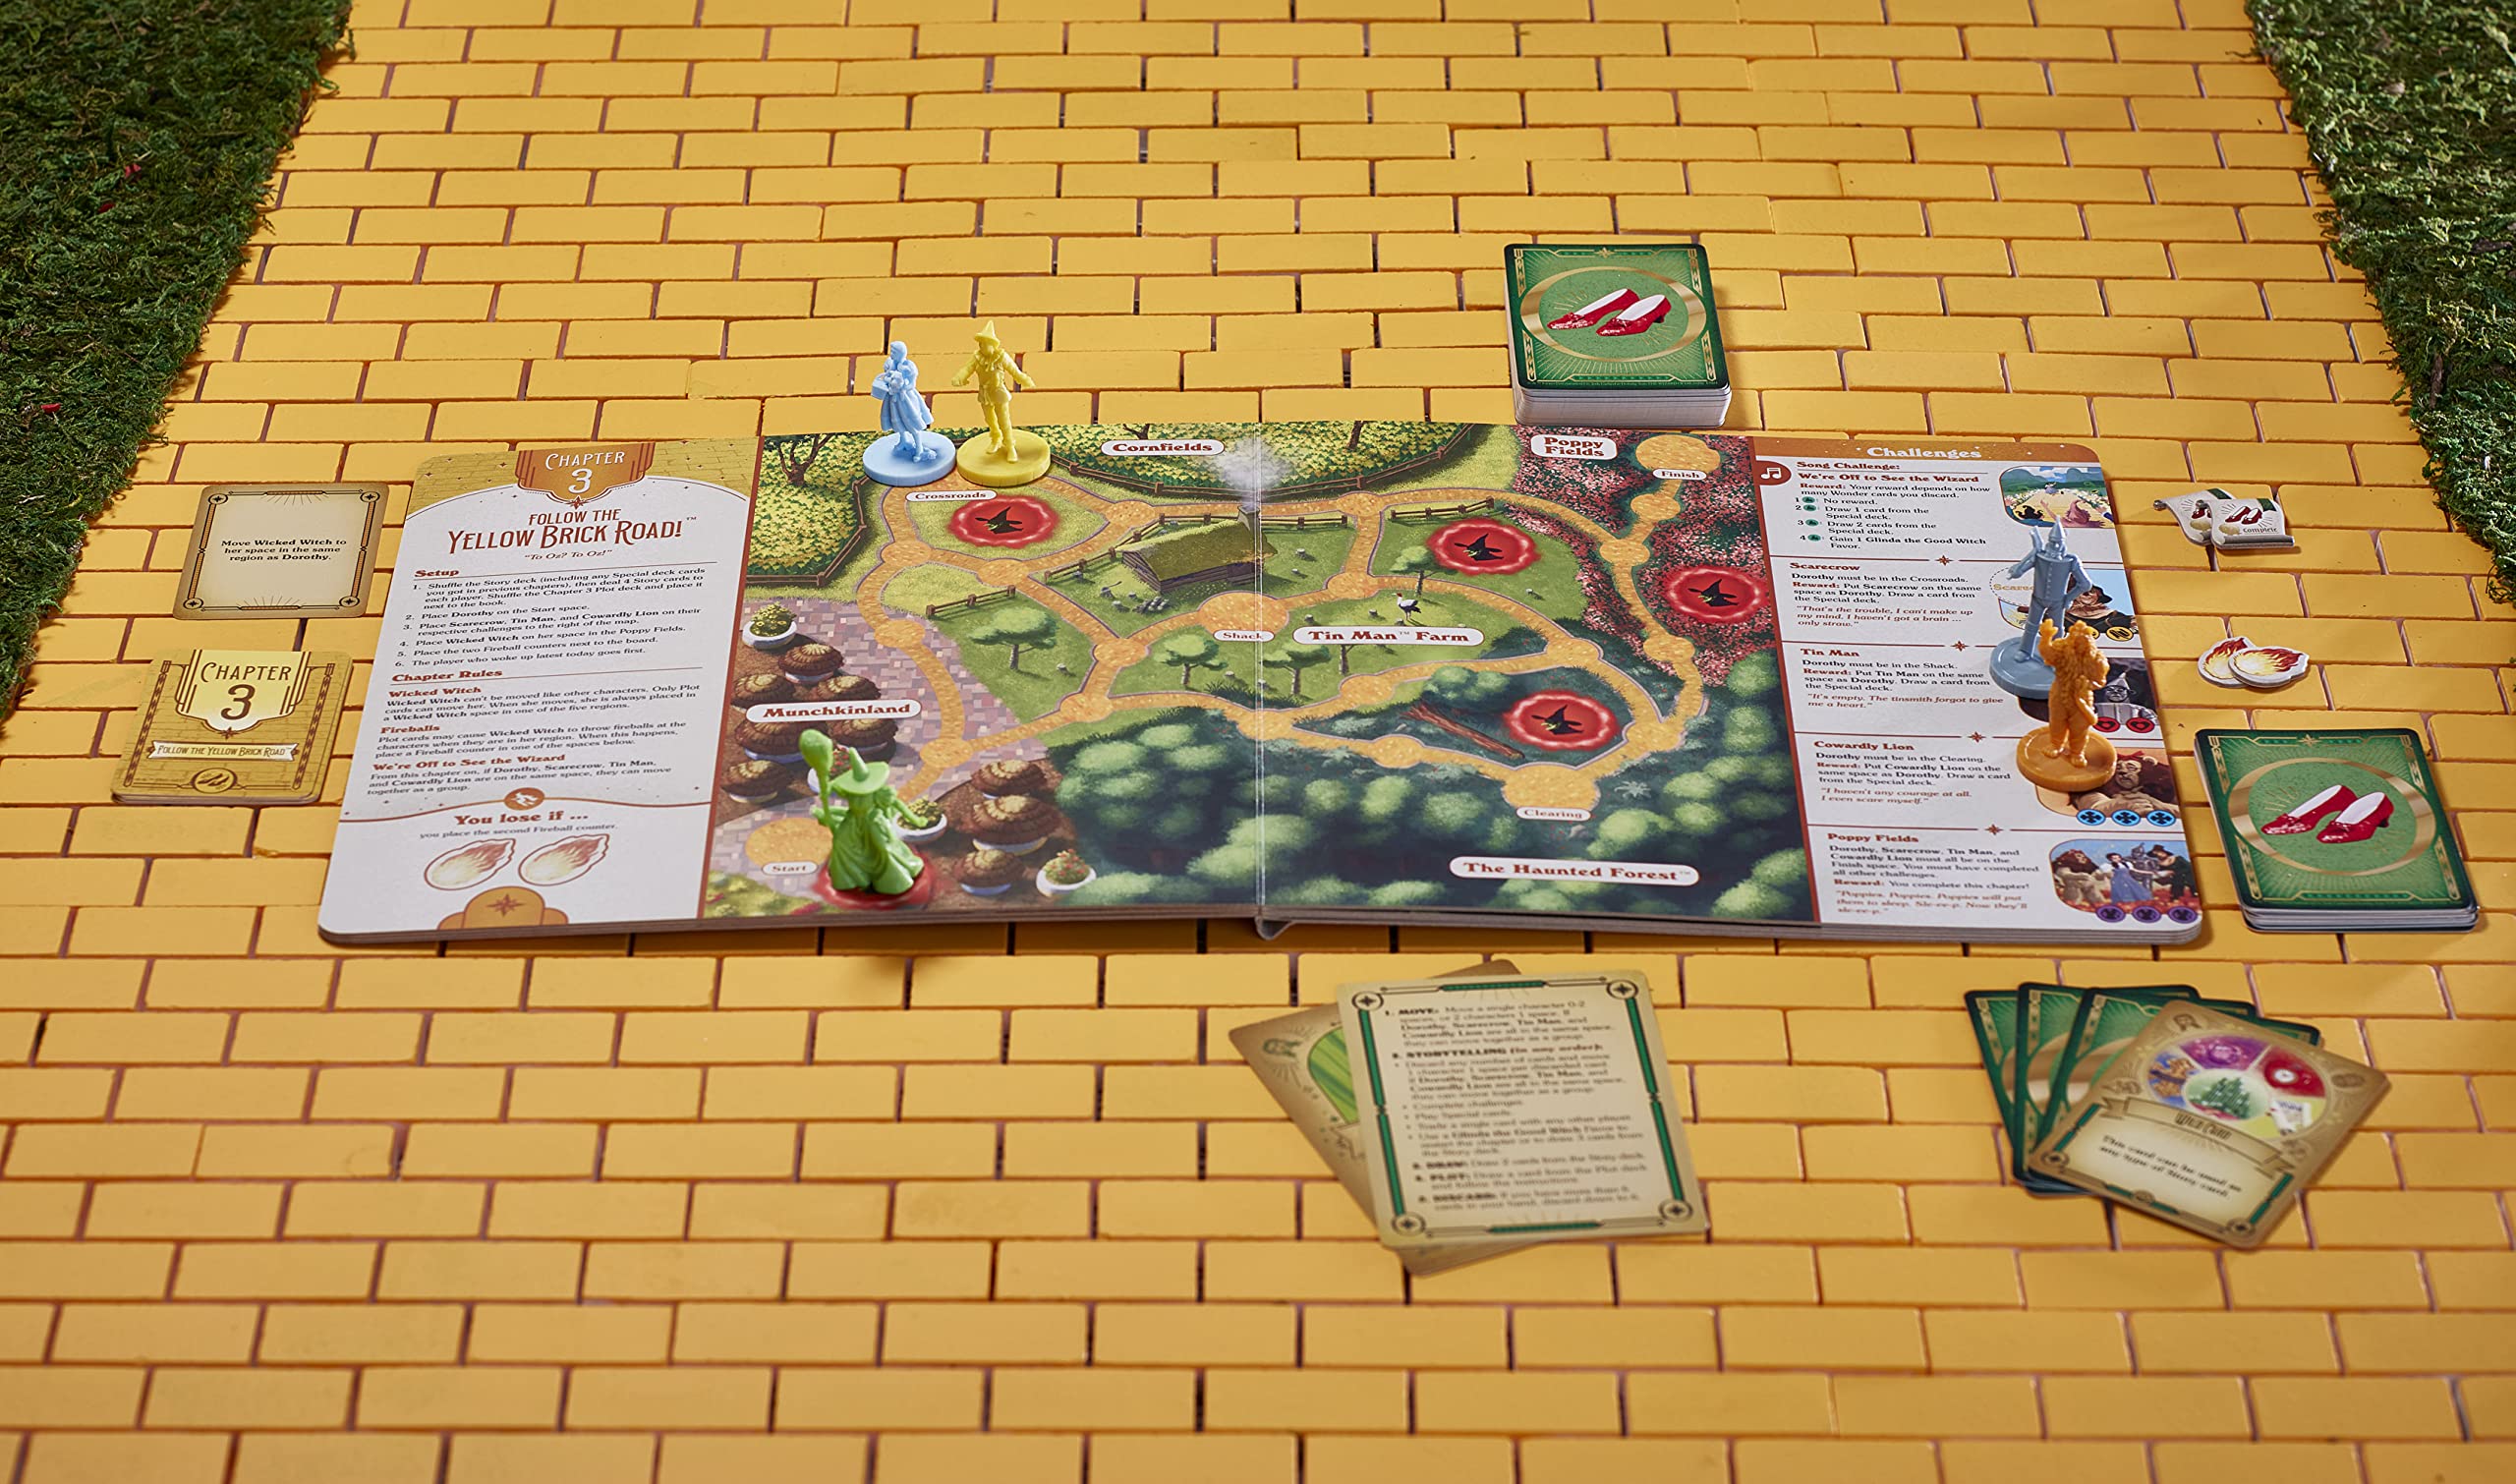 The Wizard of OZ board game will challenge your courage, brains and heart